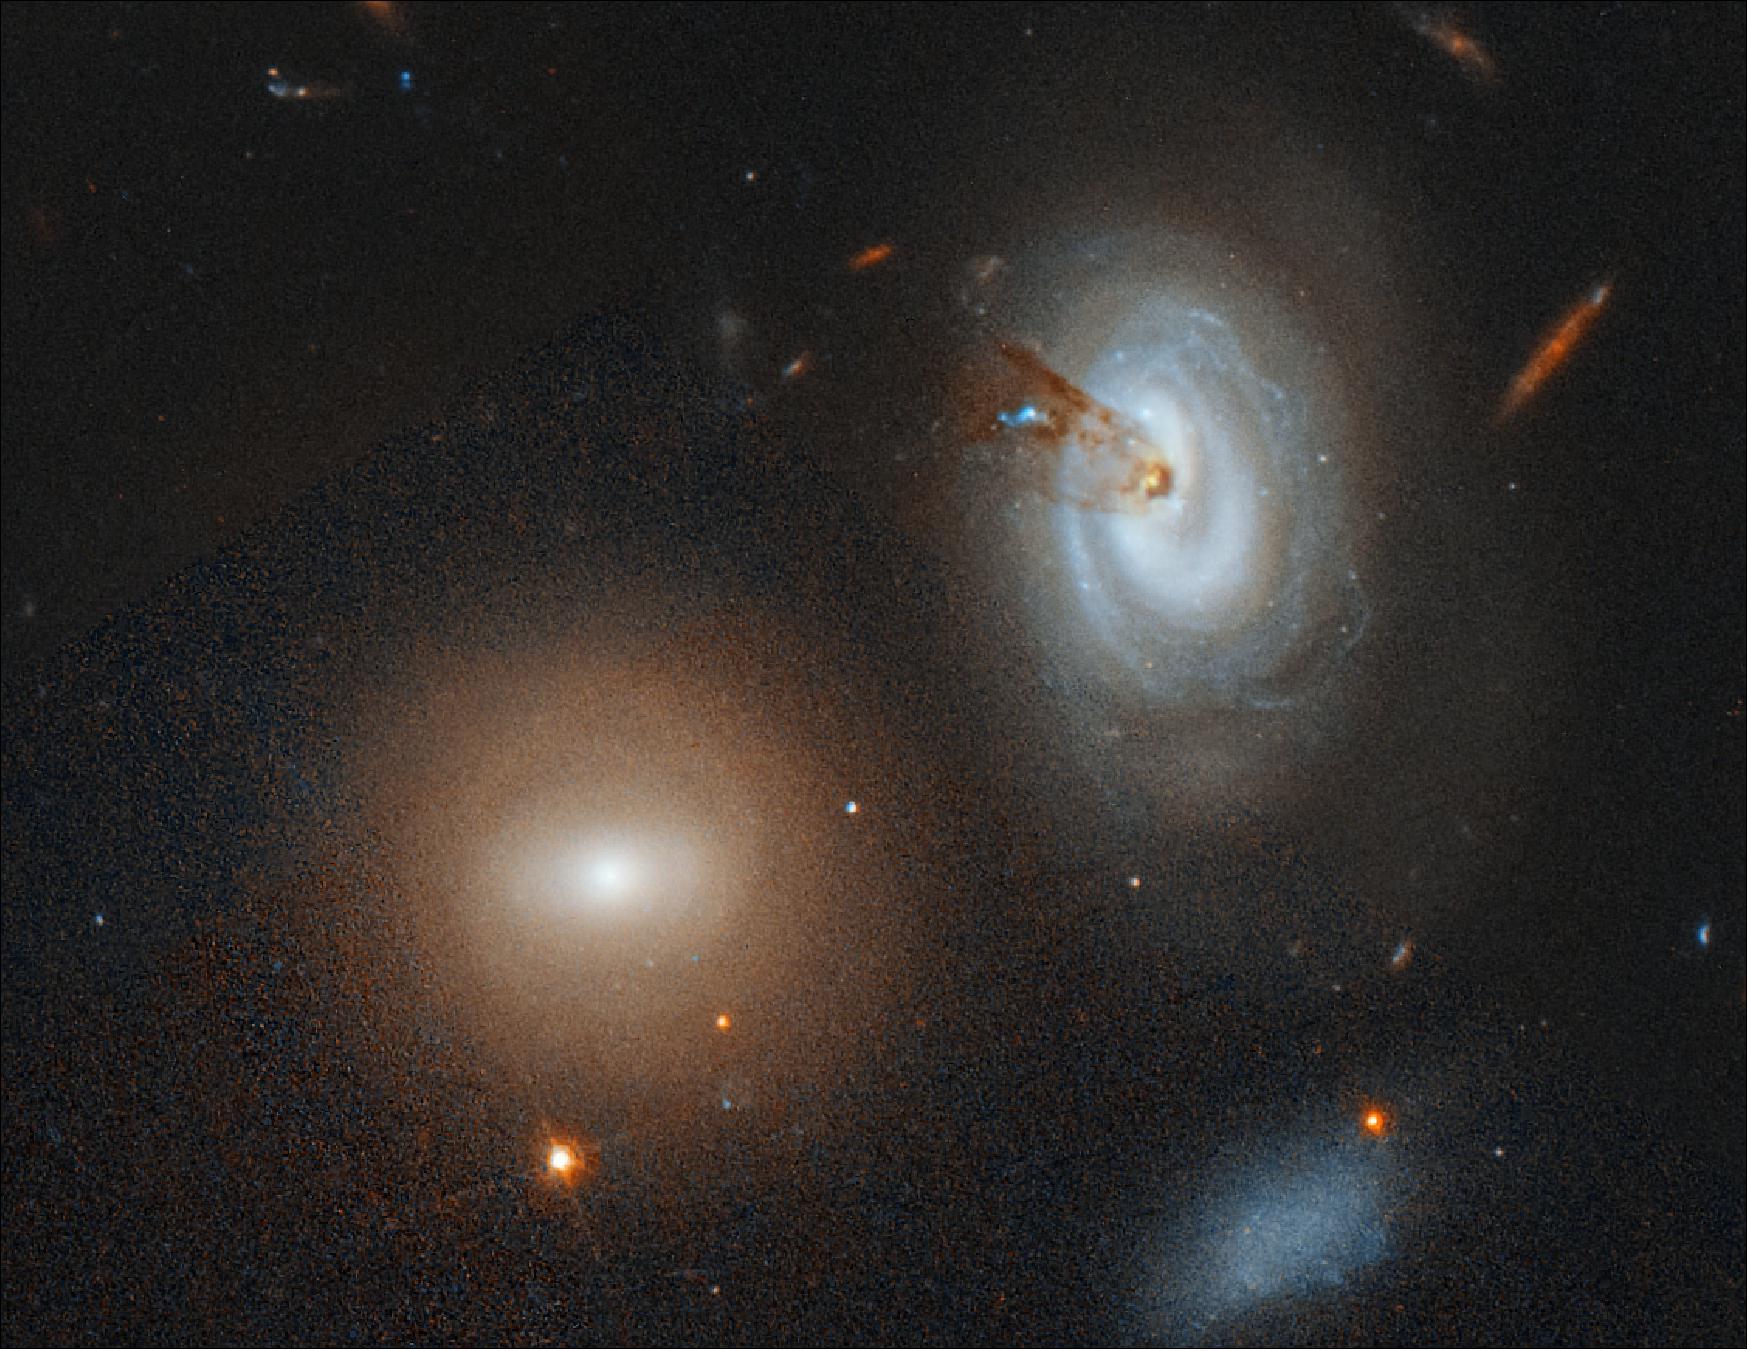 Figure 76: The spiral galaxy D100, on the far right of this Hubble Space Telescope image, is being stripped of its gas as it plunges toward the center of the giant Coma galaxy cluster. The dark brown streaks near D100's central region are silhouettes of dust escaping from the galaxy. The dust is part of a long, thin tail, also composed of hydrogen gas, that stretches like taffy from the galaxy's core. Hubble, however, sees only the dust. The telescope's sharp vision also uncovered the blue glow of clumps of young stars in the tail. The brightest clump in the middle of the tail (the blue feature) contains at least 200,000 stars, fueled by the ongoing loss of hydrogen gas from D100 [image credit: NASA, ESA, M. Sun (University of Alabama), and W. Cramer and J. Kenney (Yale University)]